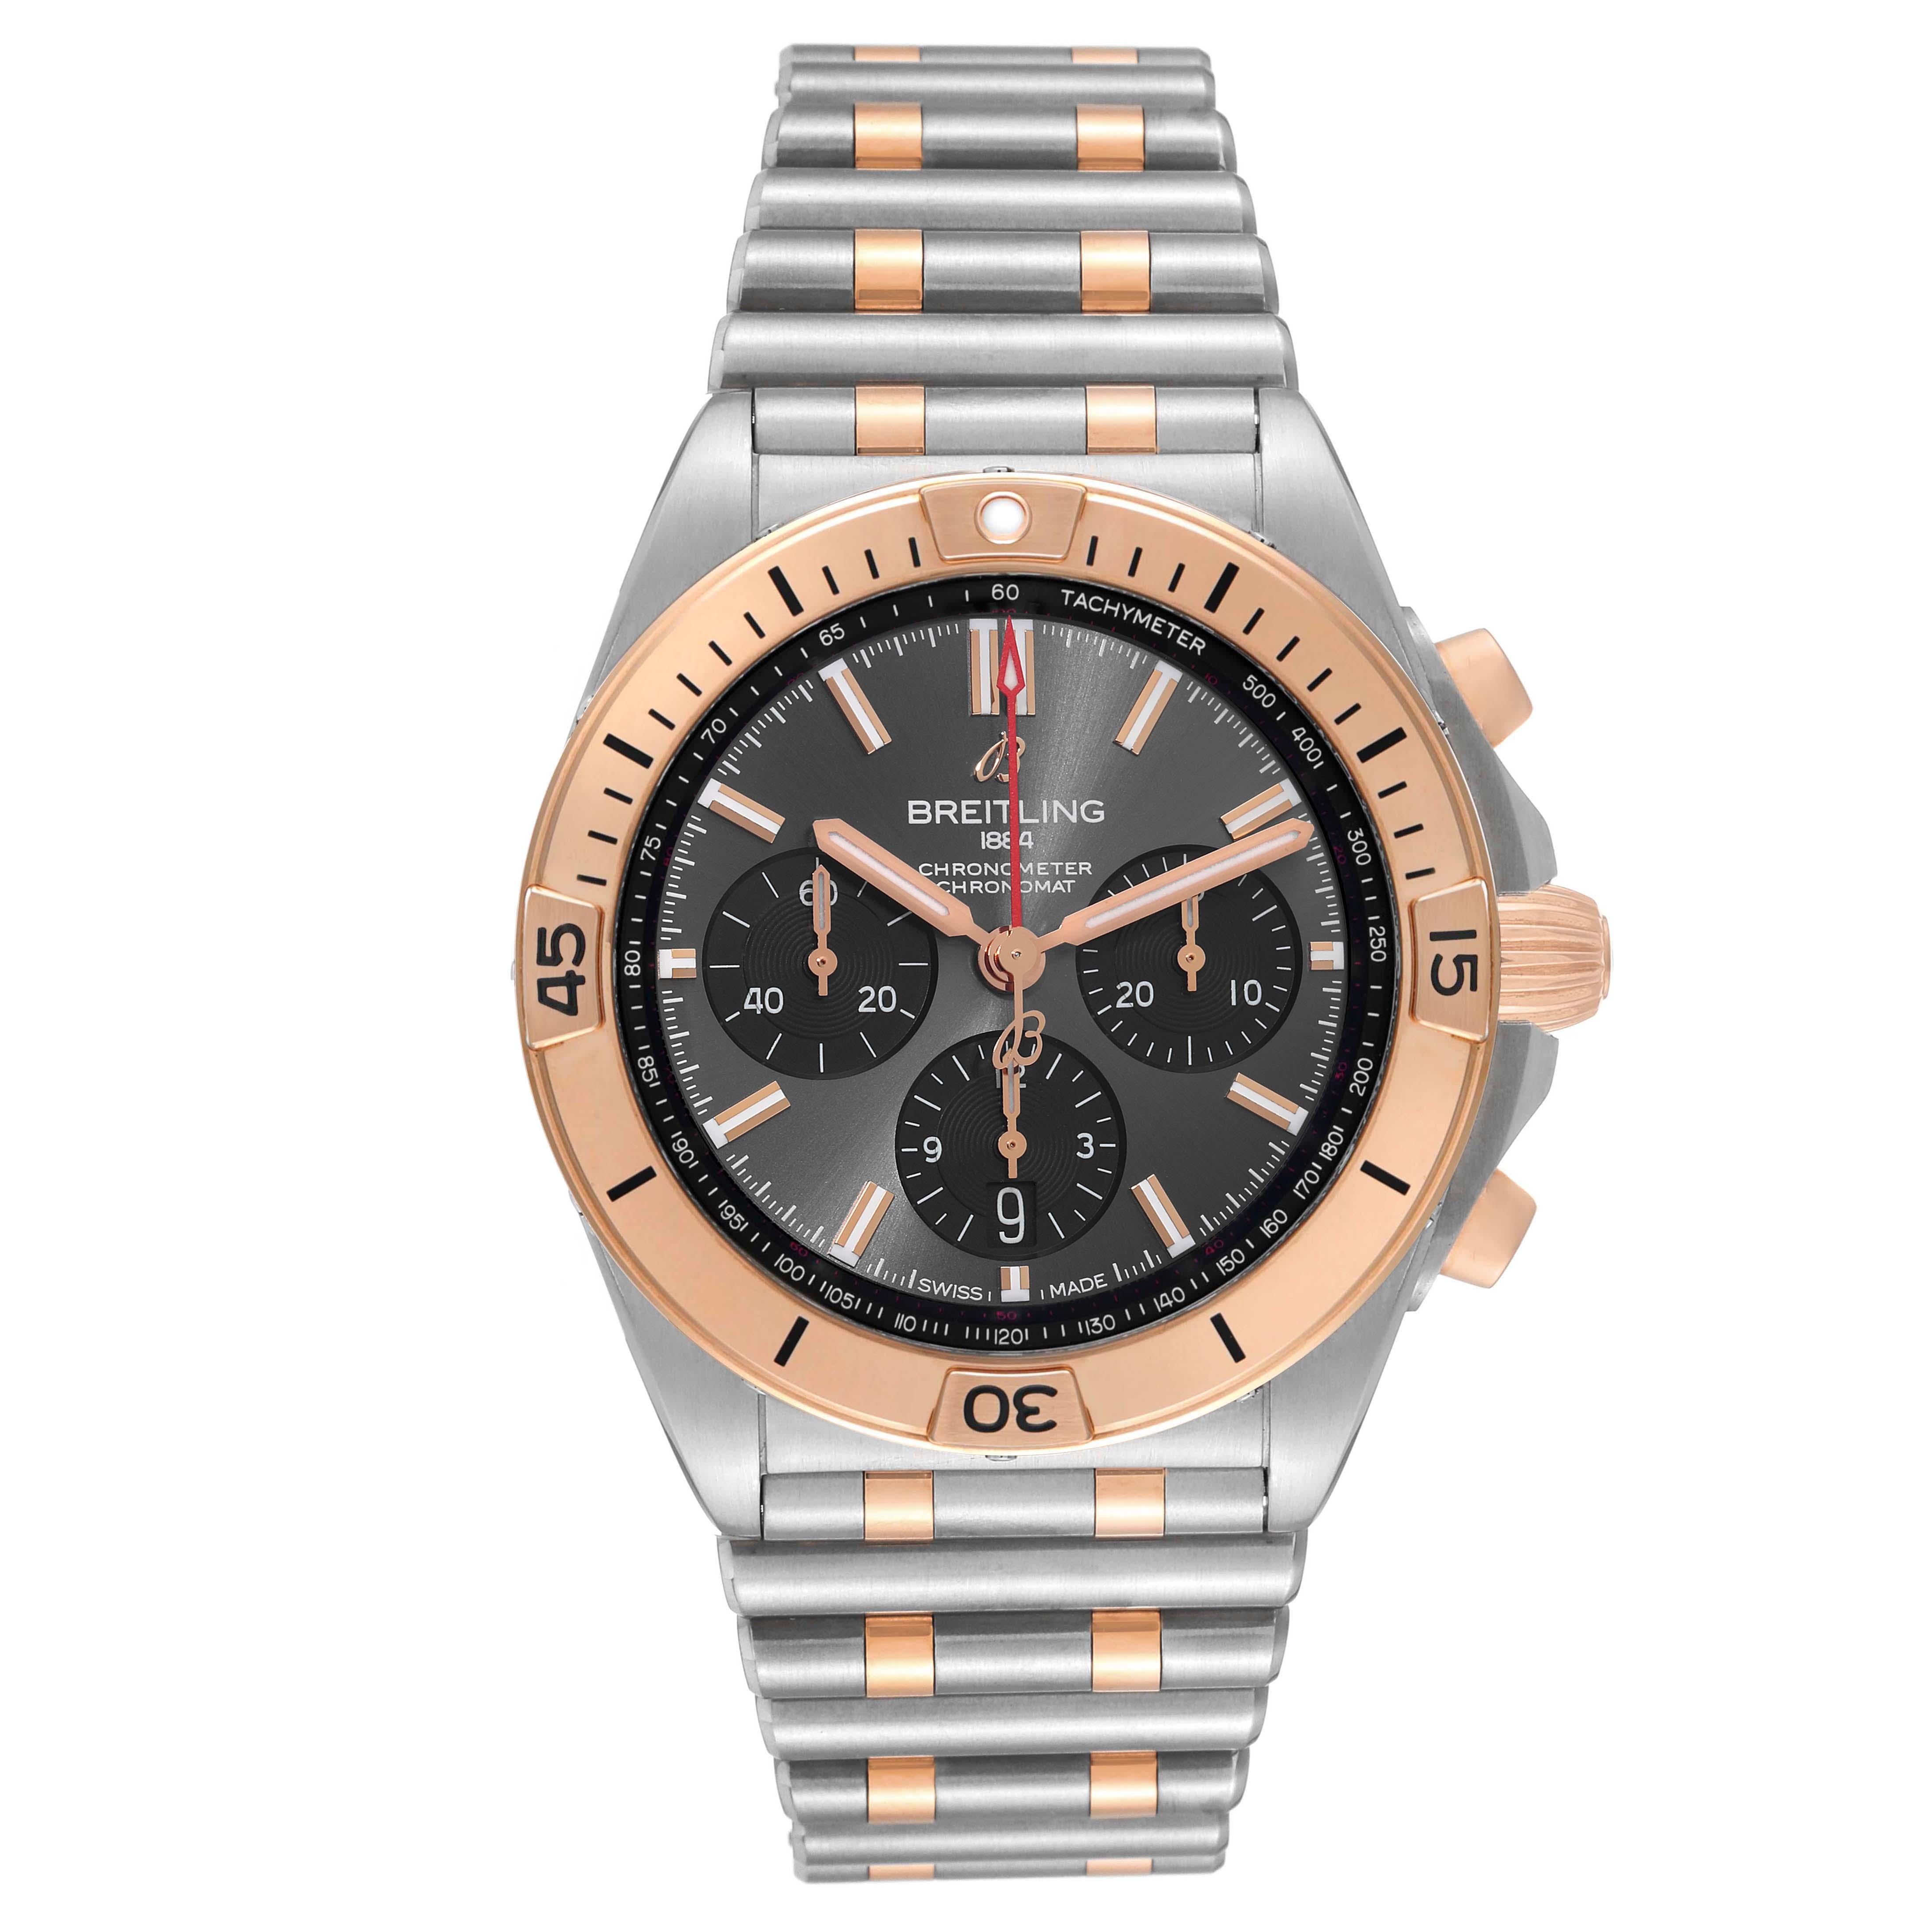 Breitling Chronomat B01 Steel Rose Gold Grey Dial Mens Watch UB0134 Box Card. Self-winding automatic officially certified chronometer movement. Chronograph function. Stainless steel case 42.0 mm in diameter with 18k rose gold pushers and screw-down